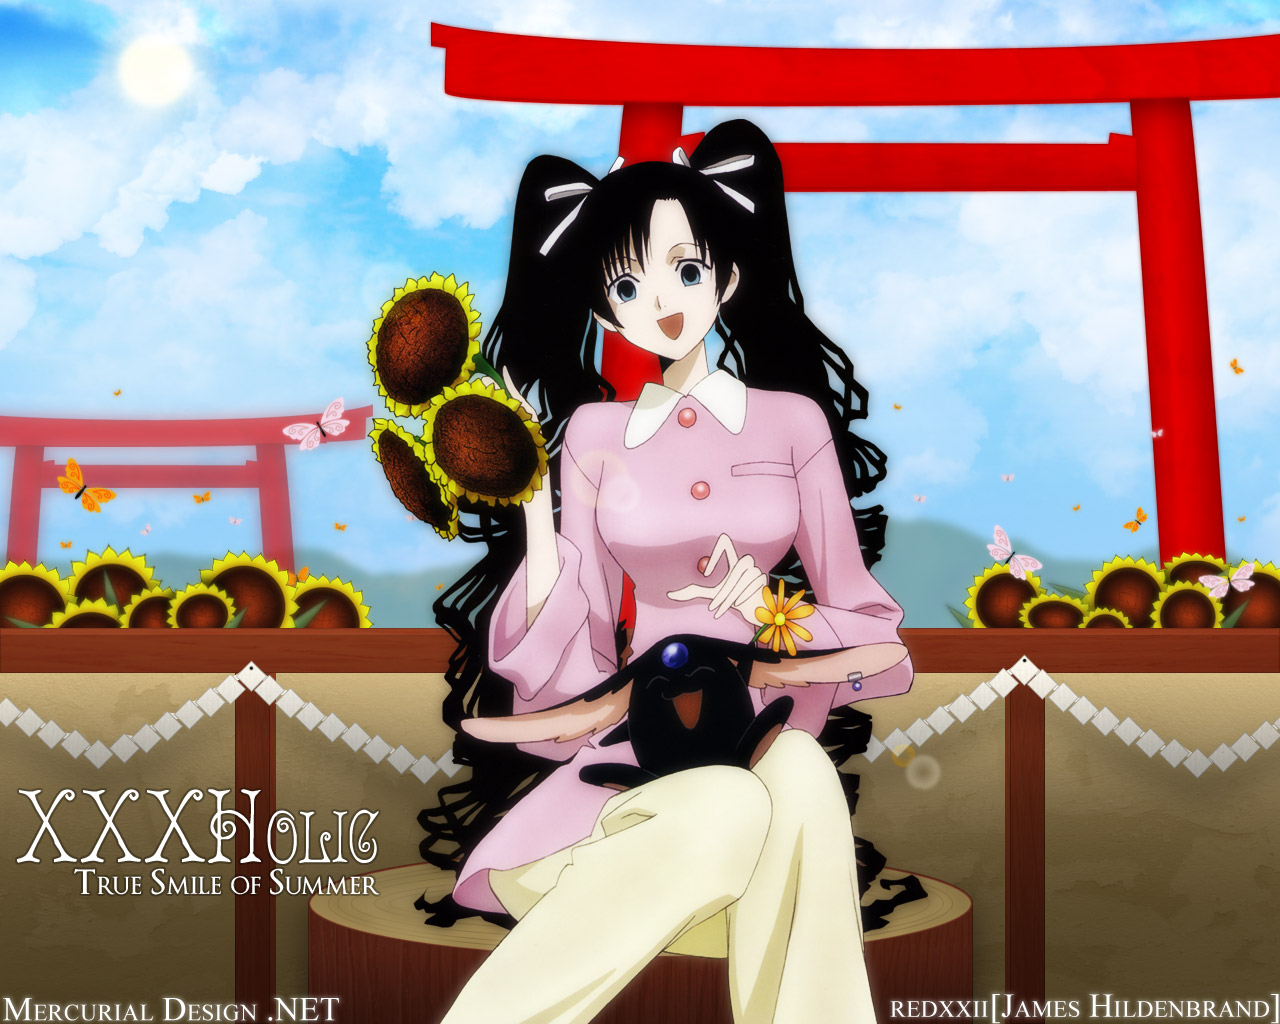 xxxHOLiC Picture - Image Abyss